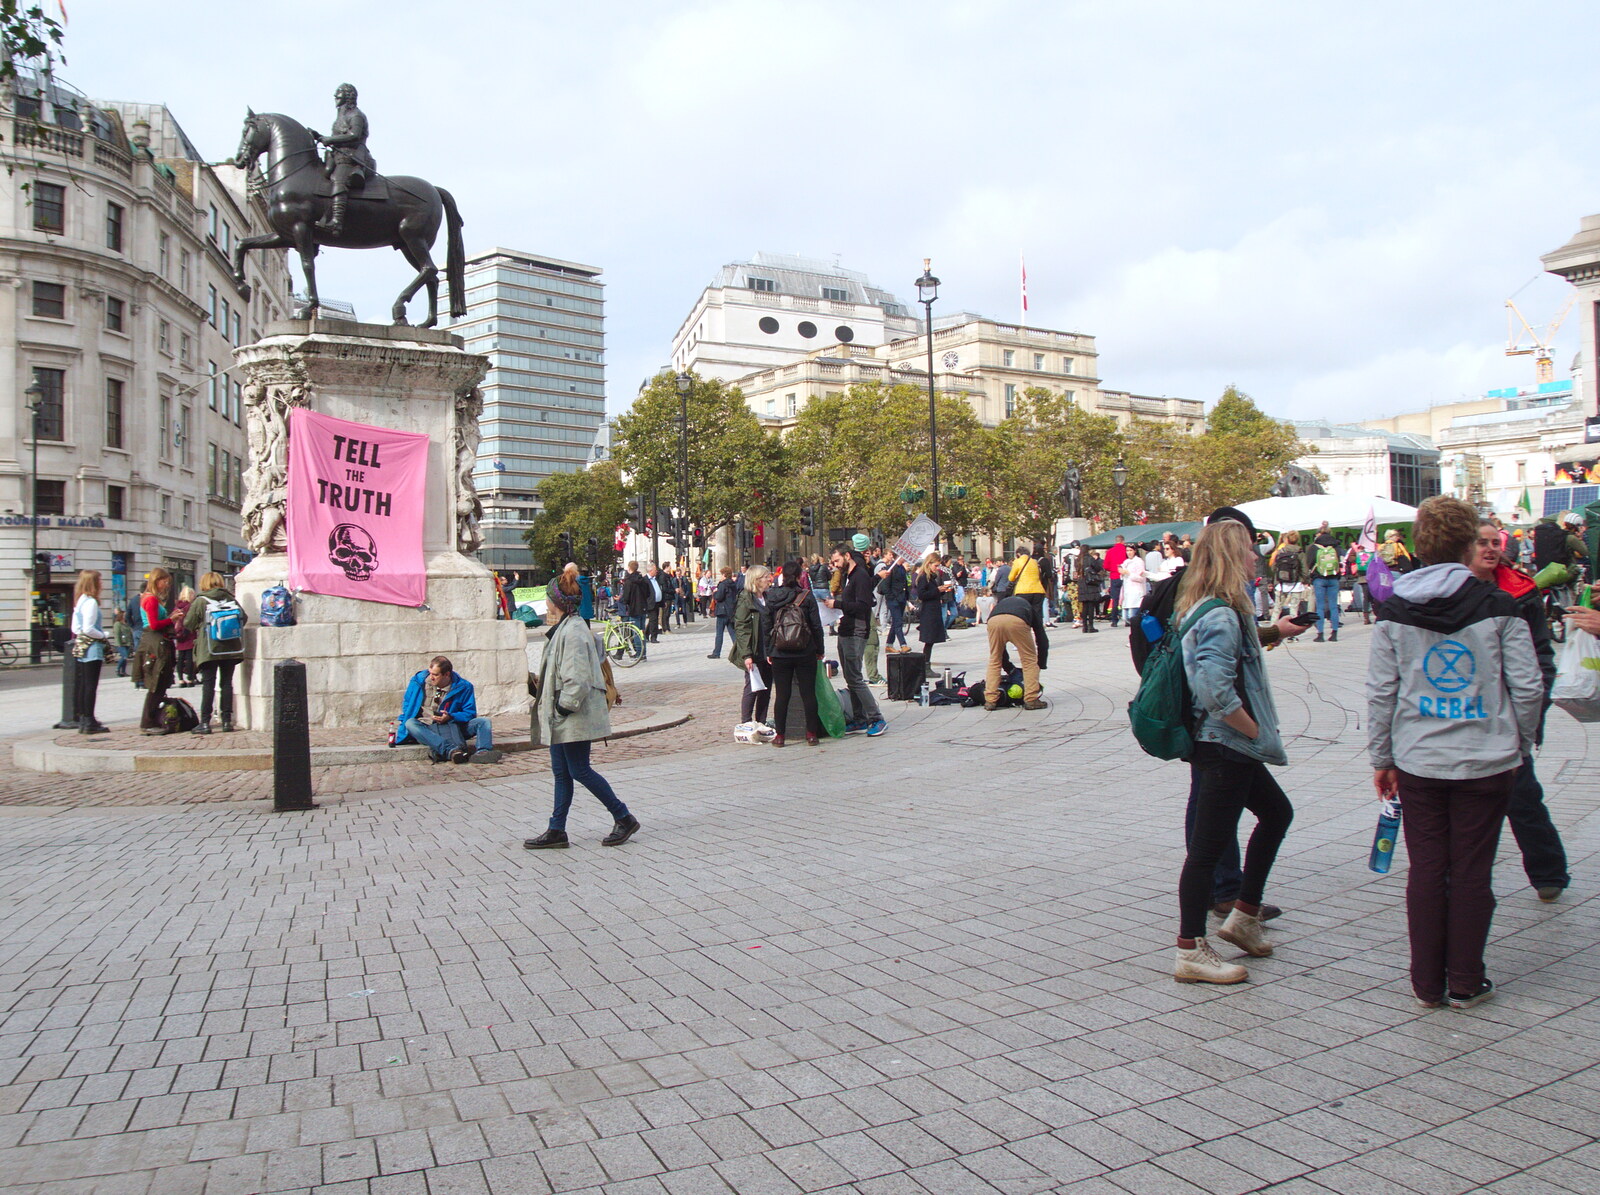 People roam around under a 'Tell the truth' banner from The Extinction Rebellion Protest, Westminster, London - 9th October 2019